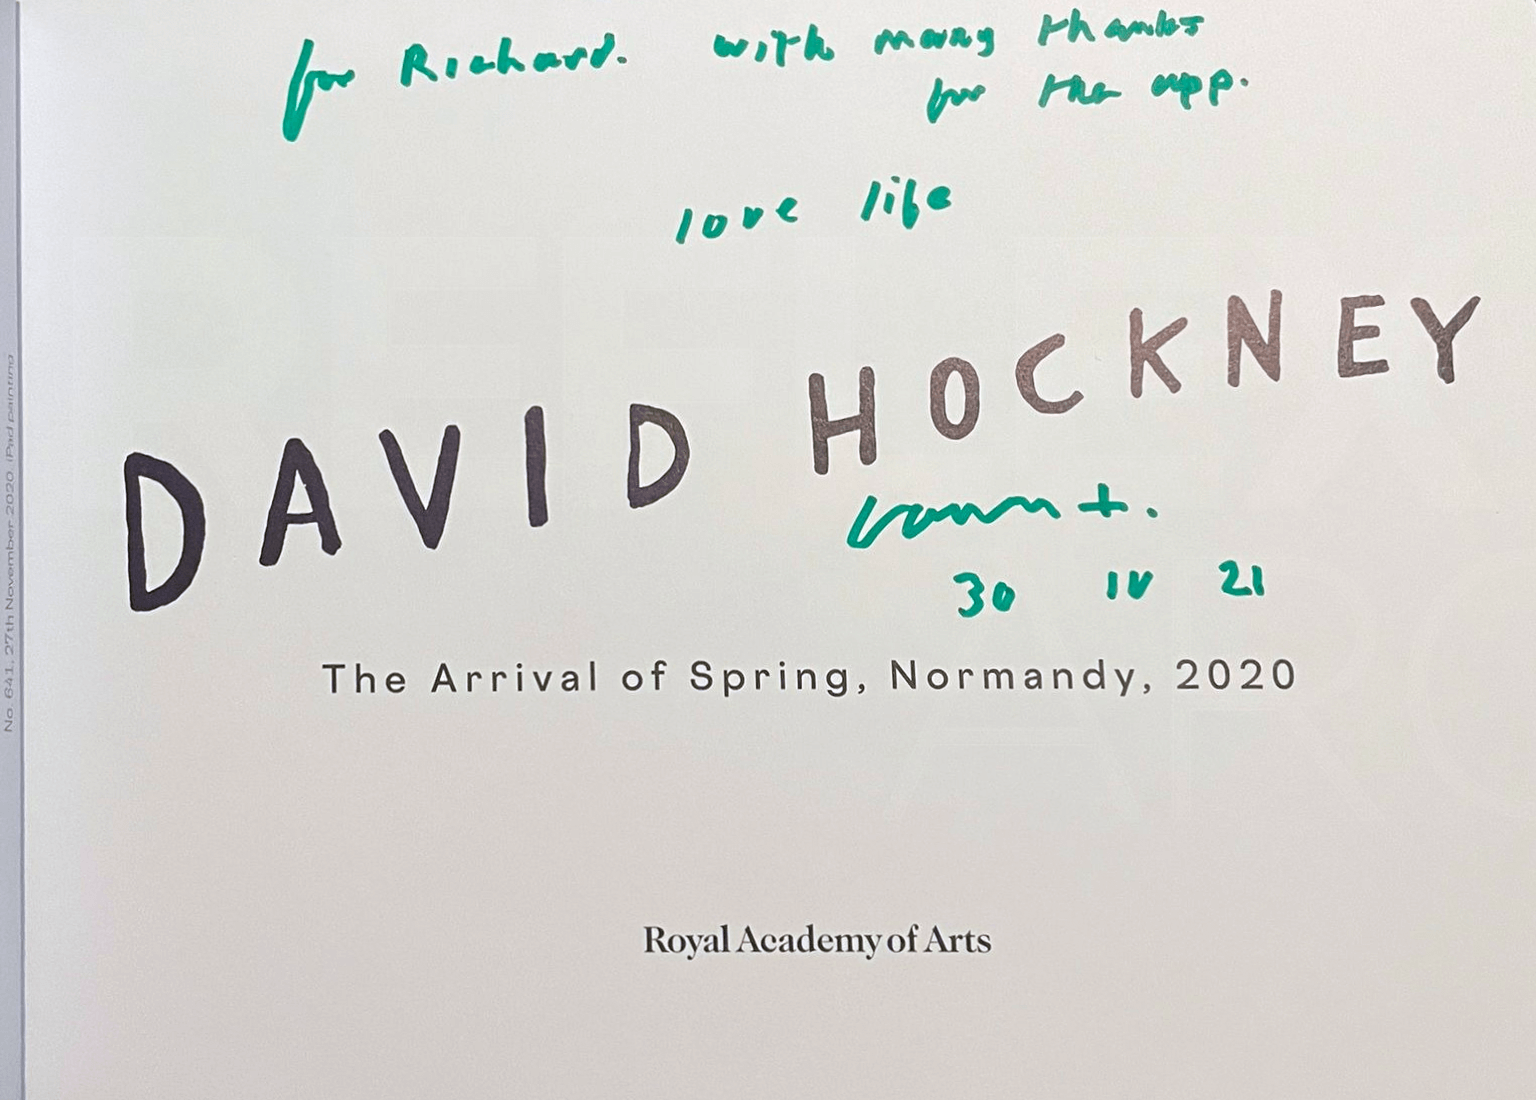 For Richard, with many thanks for the app. Love life. Signed David Hockney